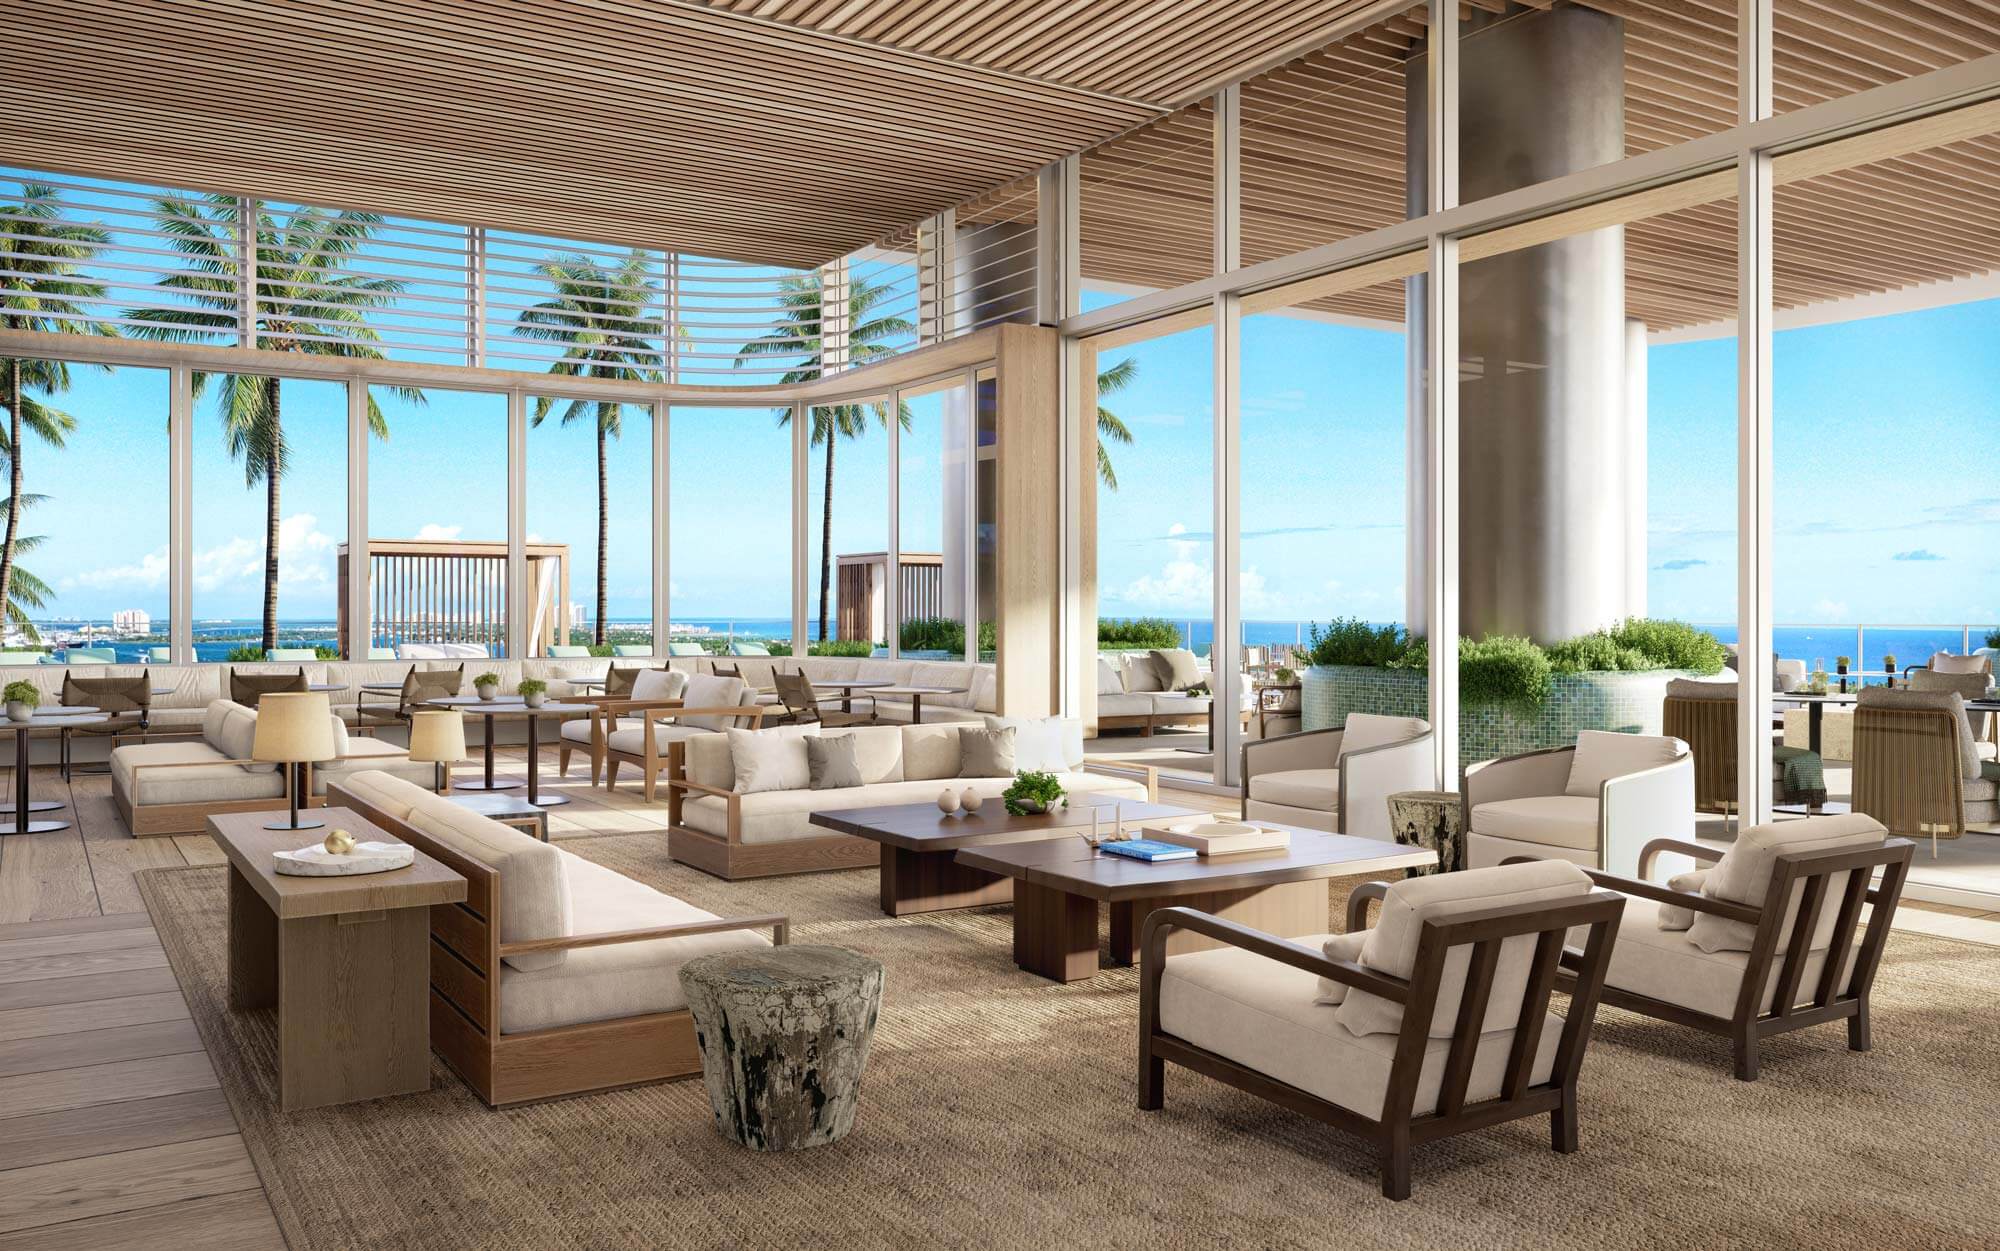 luxury interiors of lounge with views of the ocean